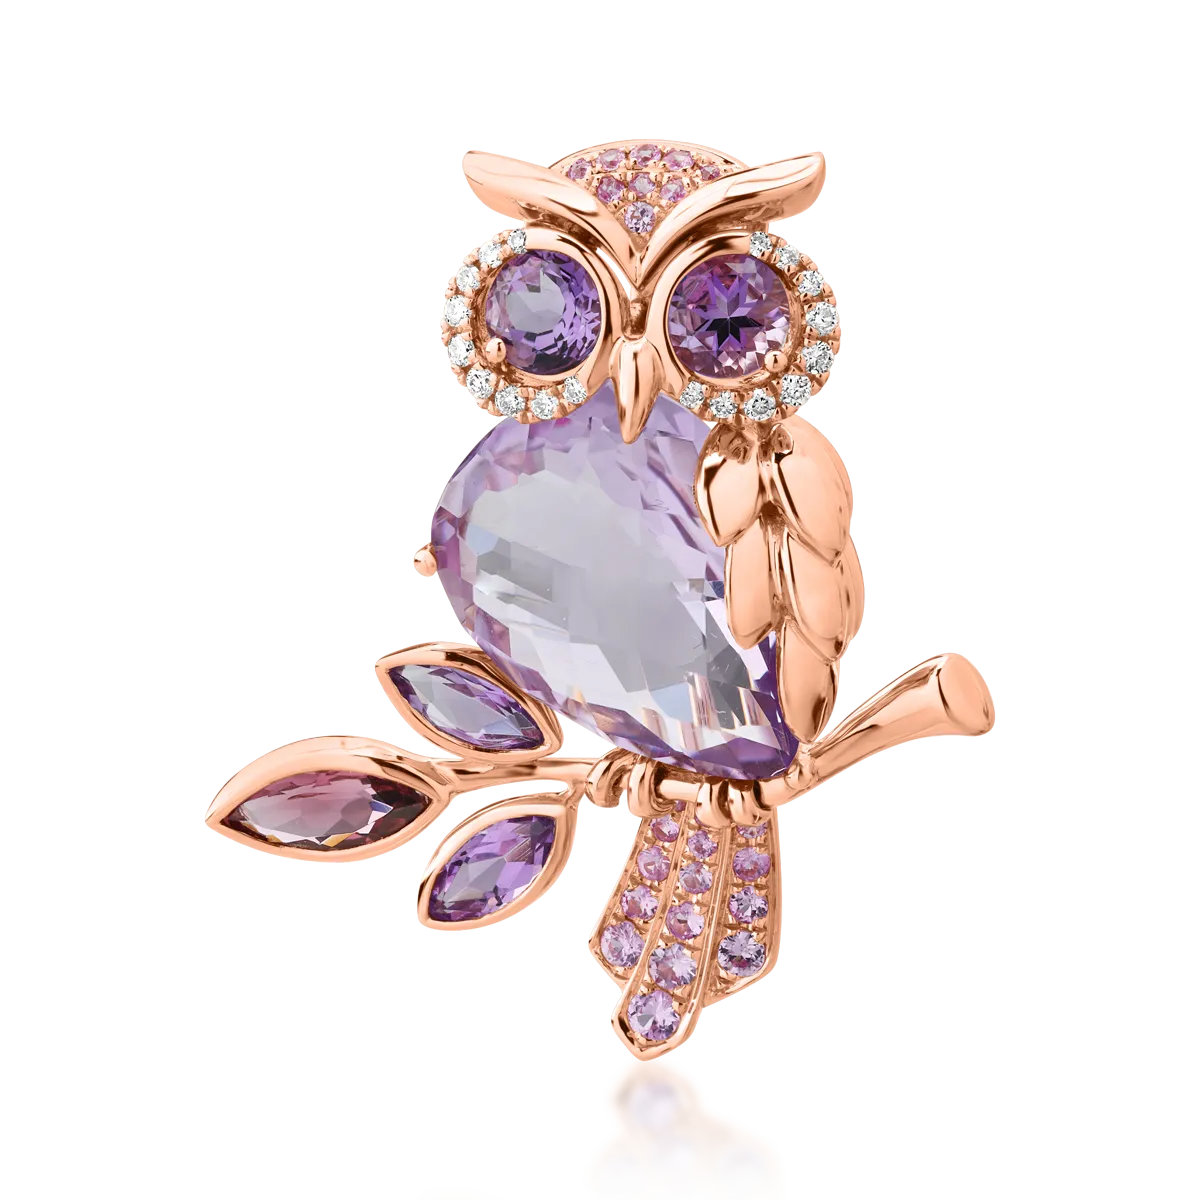 18K rose gold brooch with 10.4ct amethyst and 0.5ct pink tourmaline